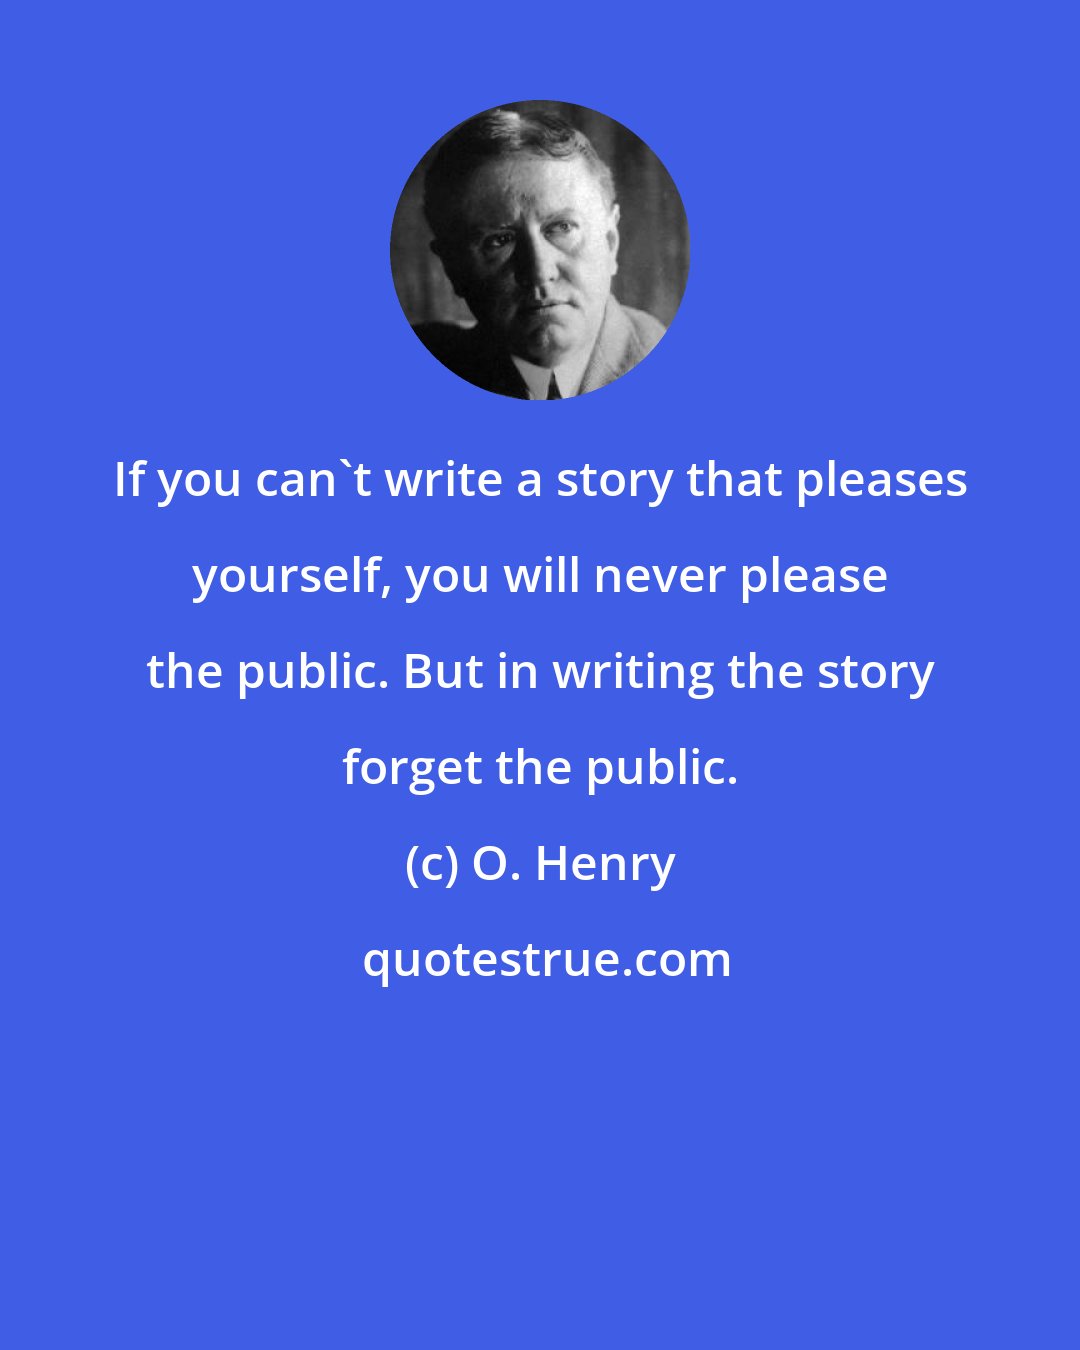 O. Henry: If you can't write a story that pleases yourself, you will never please the public. But in writing the story forget the public.